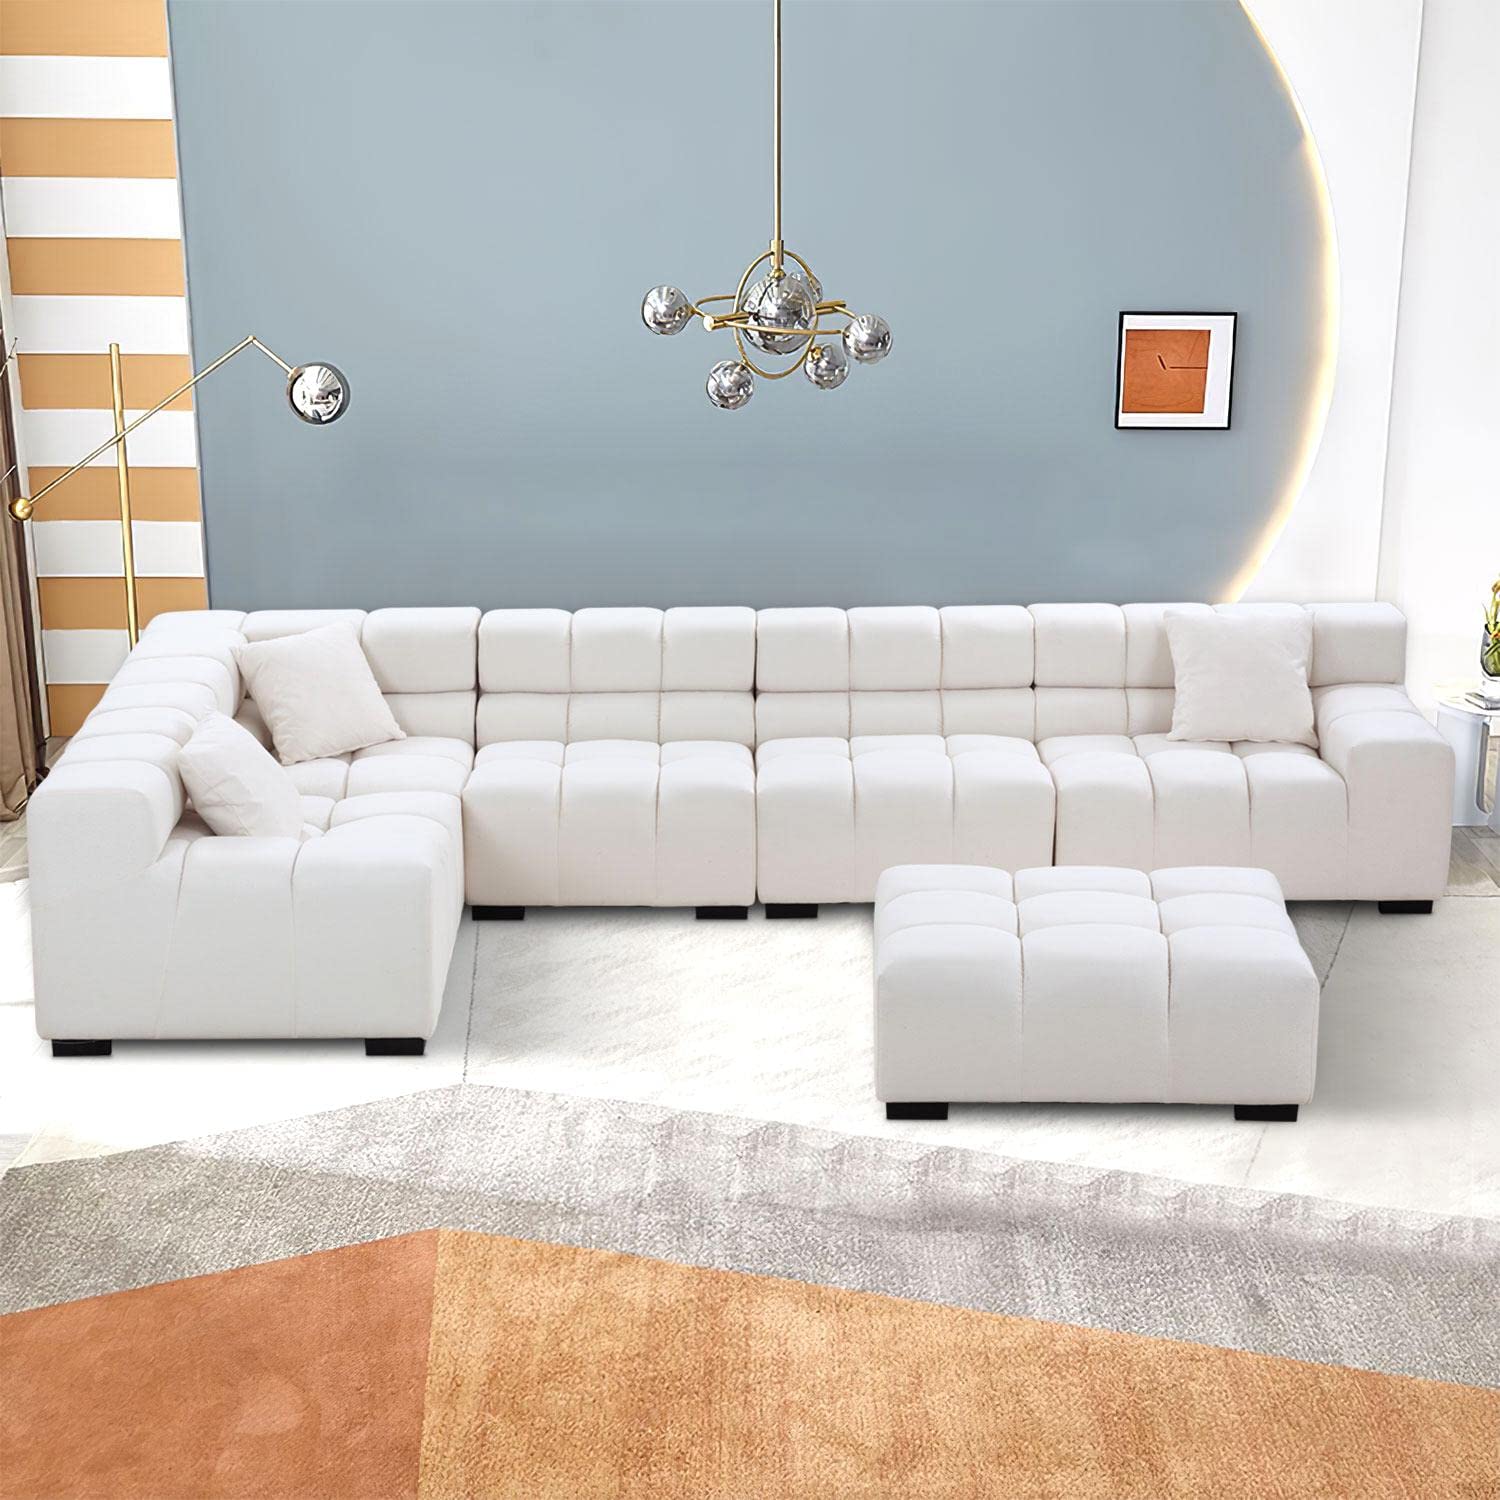 Modular Sectional Sofa 149.6" Sleeper Couch(White)